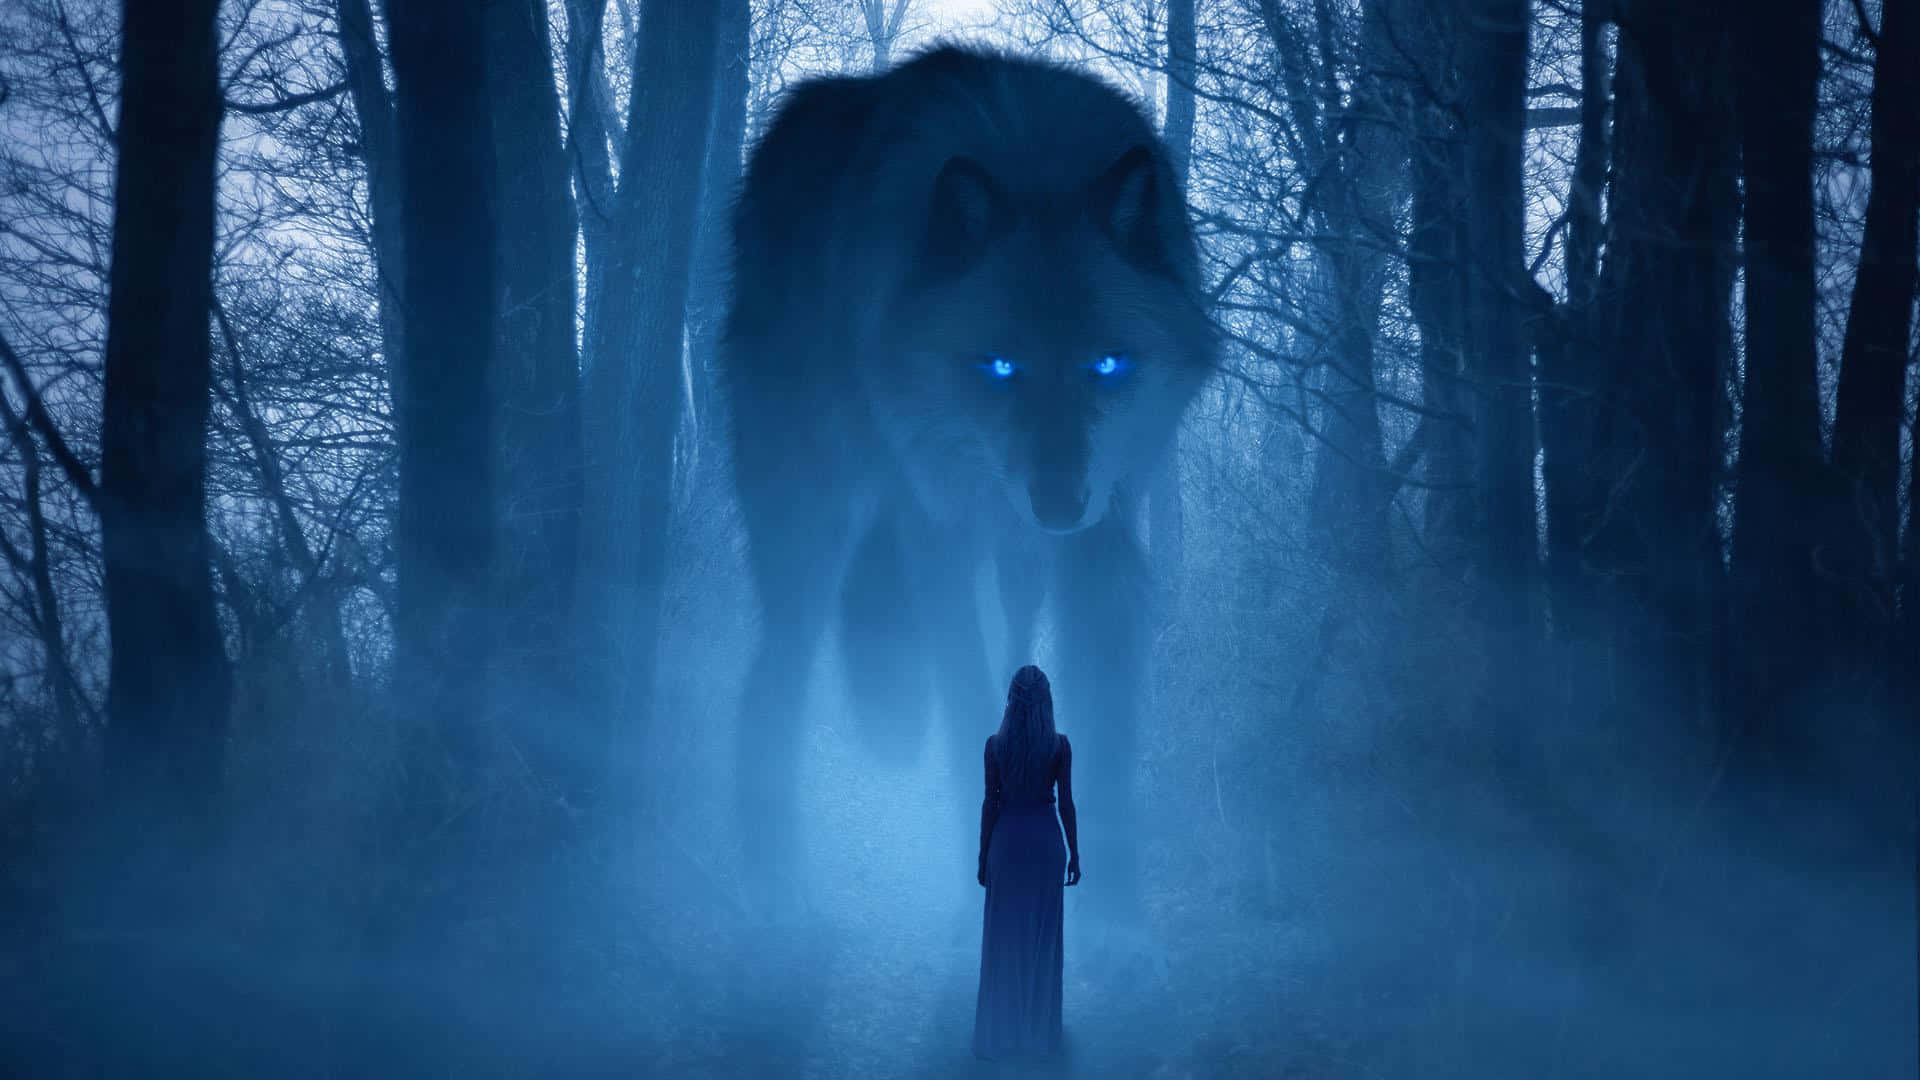 Captivating Wolf In Enchanting Forest Wallpaper